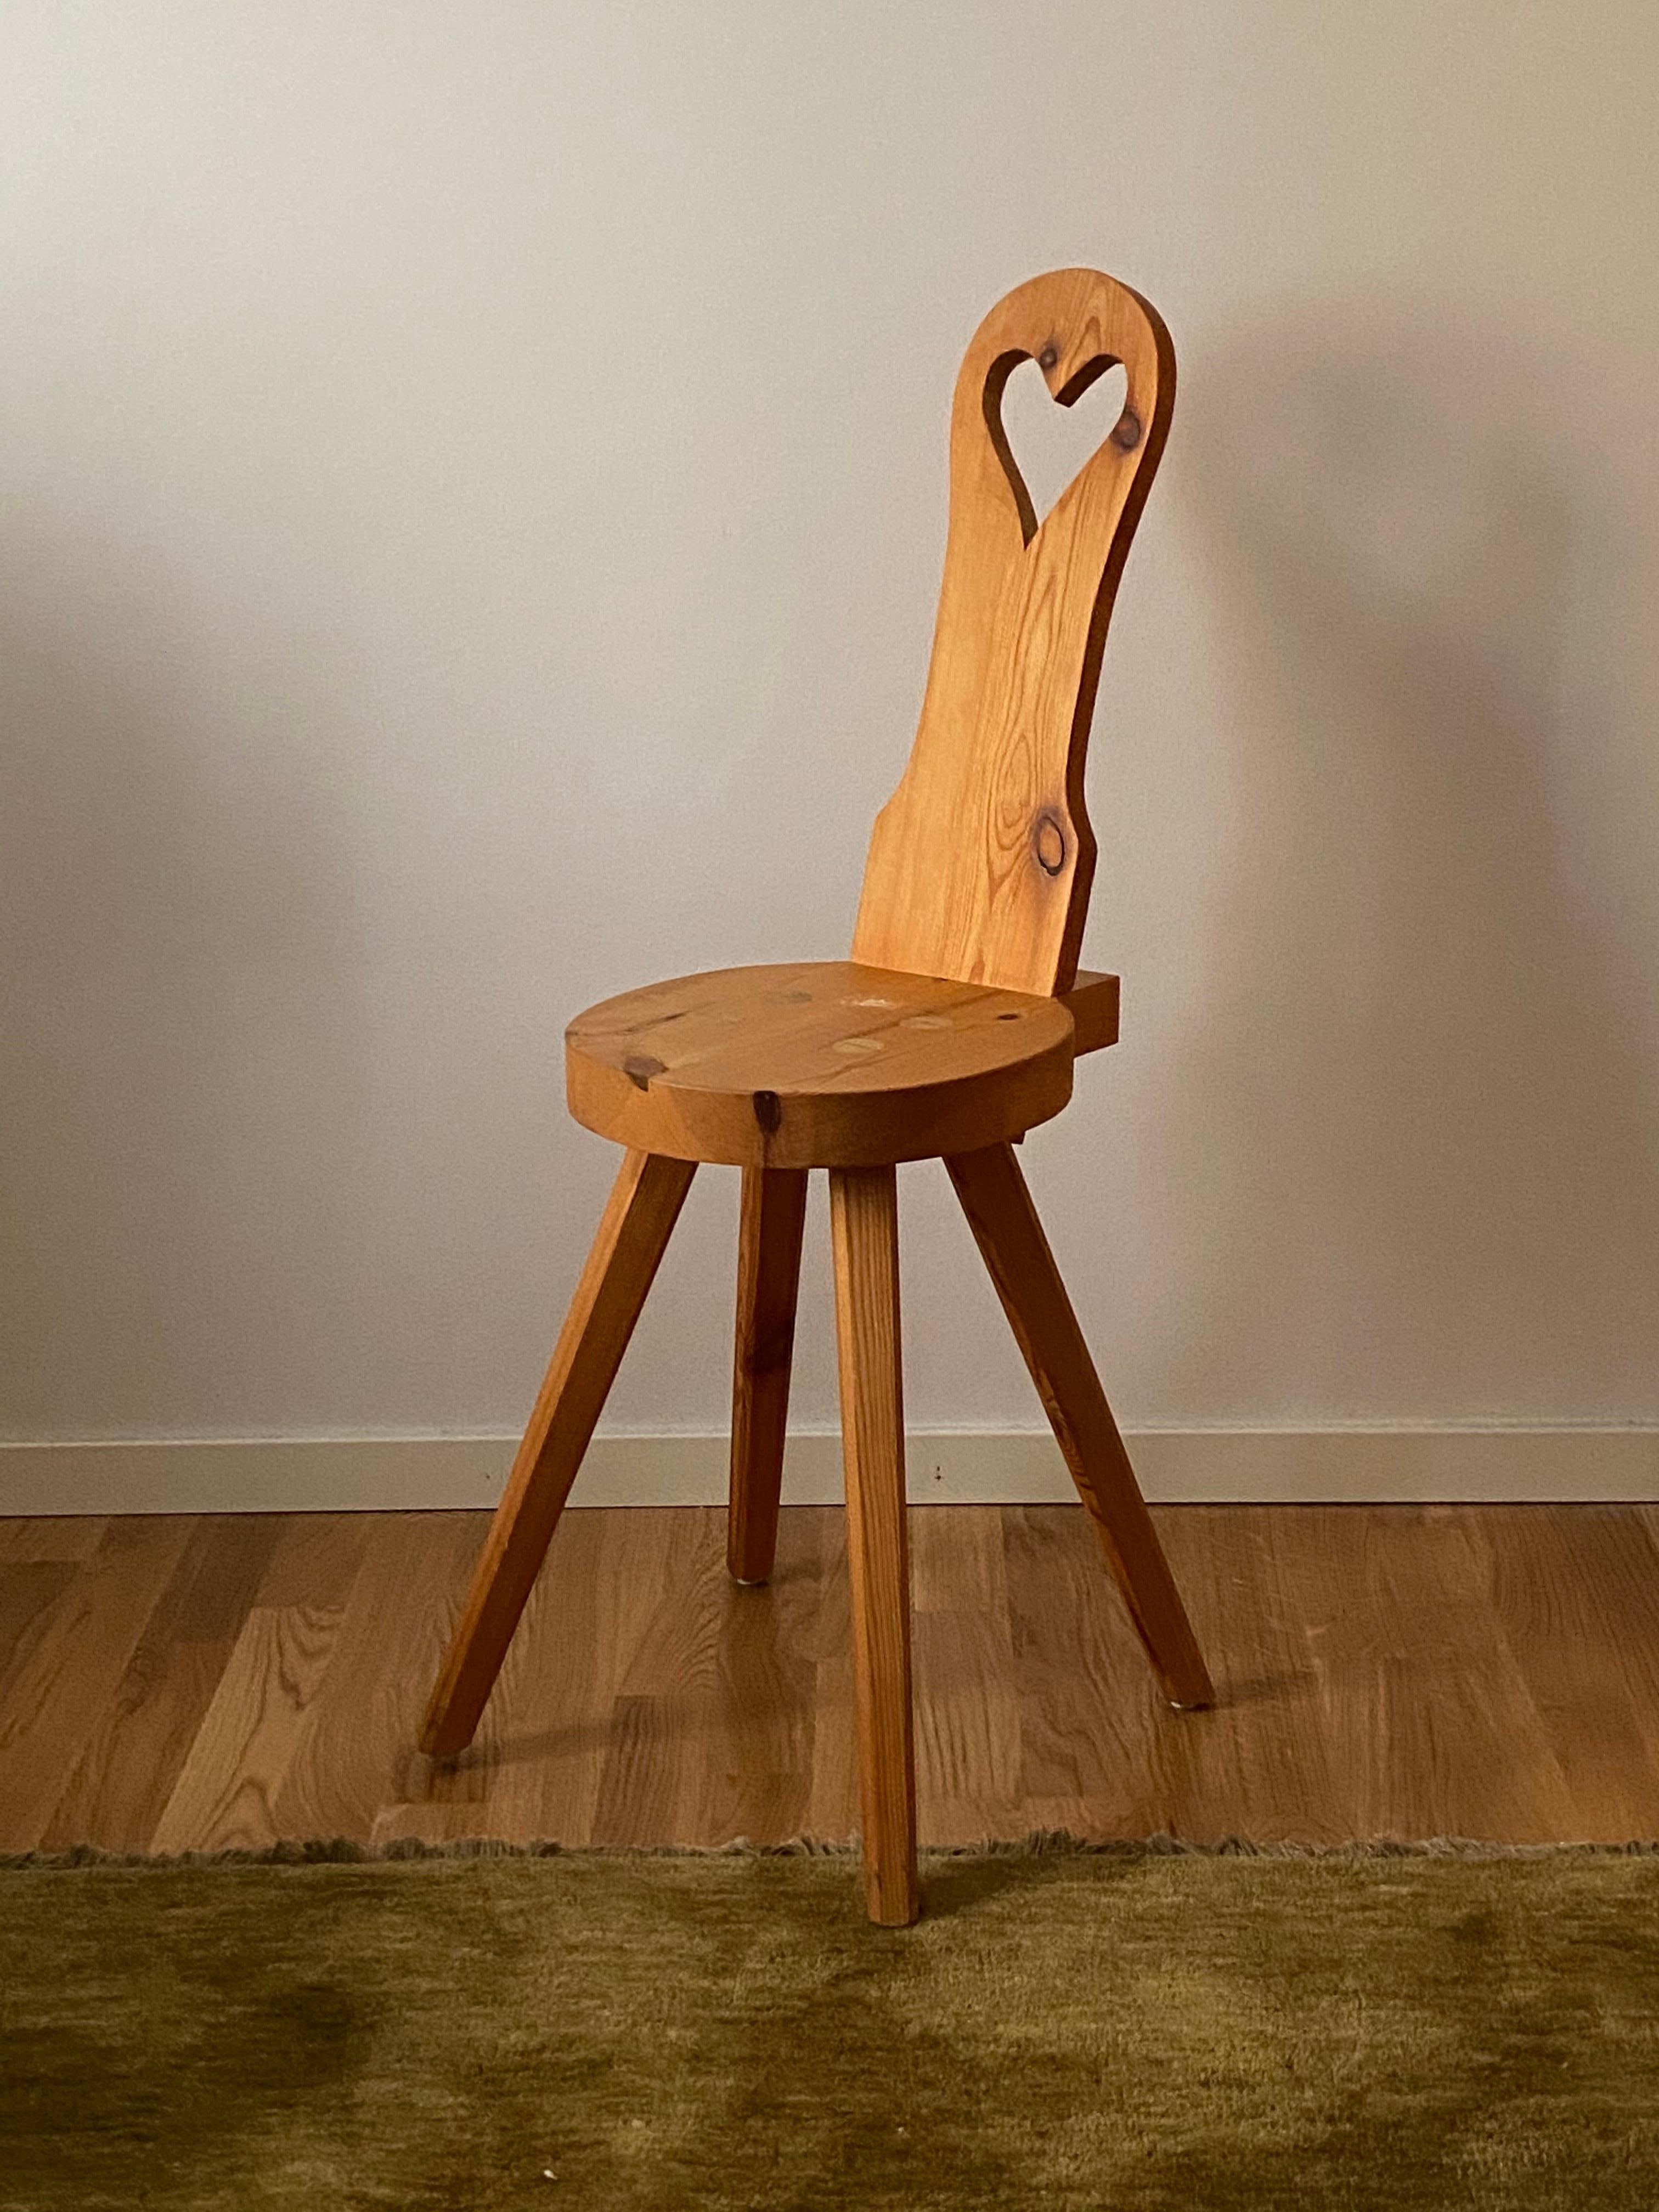 A handmade Minimalist stool, designed and produced in Sweden, 1970s. In solid pine. 

Other designers of the 20th century working in pine include Charlotte Perriand, Lisa-Johansson Pape, Pierre Chapo, and Axel Einar Hjorth.